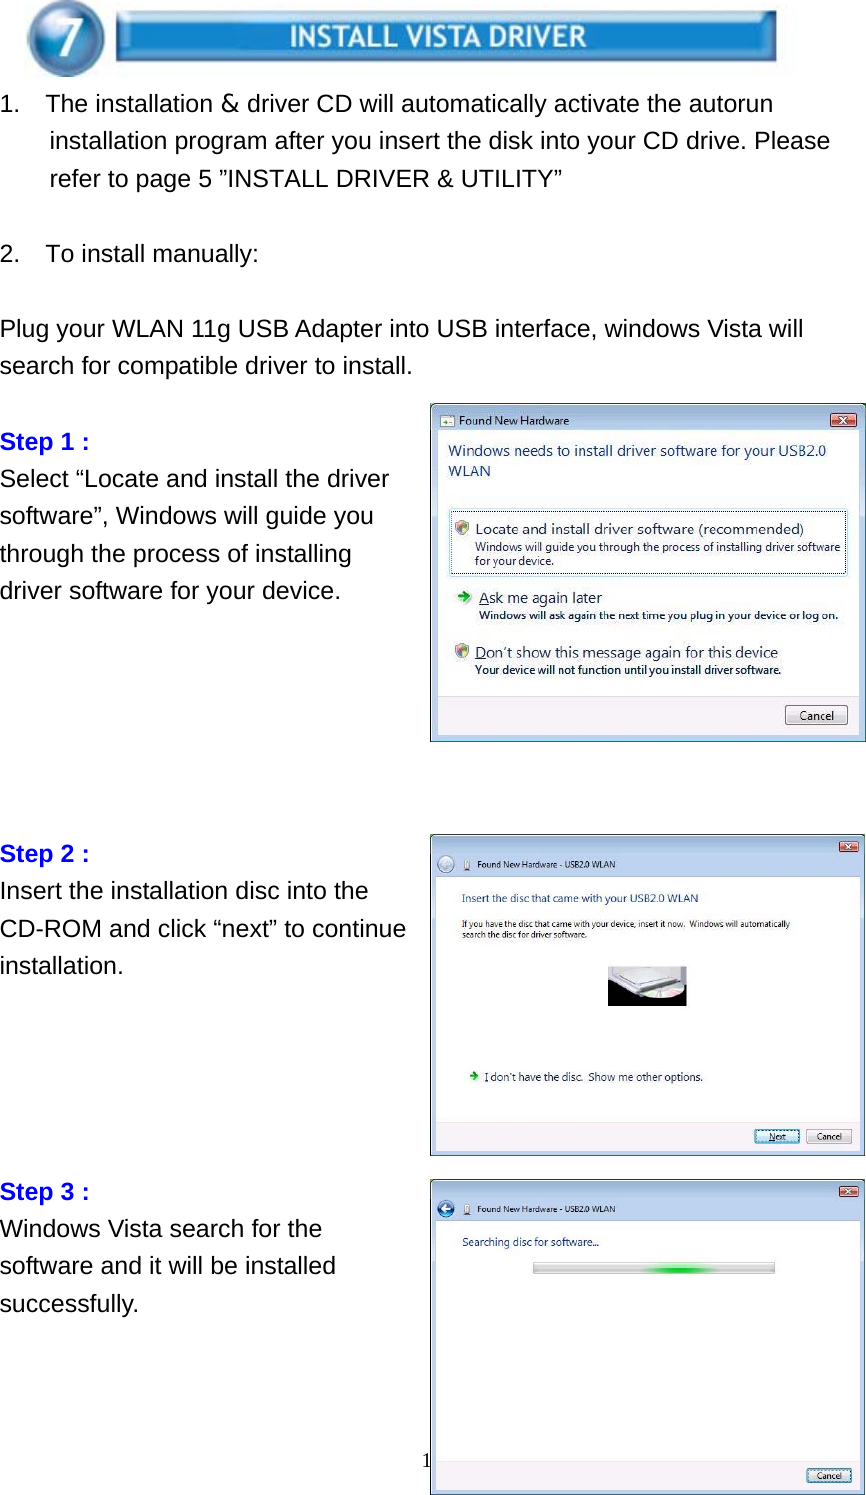    18  1.  The installation &amp; driver CD will automatically activate the autorun installation program after you insert the disk into your CD drive. Please refer to page 5 ”INSTALL DRIVER &amp; UTILITY”  2.  To install manually:   Plug your WLAN 11g USB Adapter into USB interface, windows Vista will search for compatible driver to install.  Step 1 : Select “Locate and install the driver software”, Windows will guide you through the process of installing driver software for your device.       Step 2 : Insert the installation disc into the CD-ROM and click “next” to continue installation.               Step 3 : Windows Vista search for the software and it will be installed successfully.   